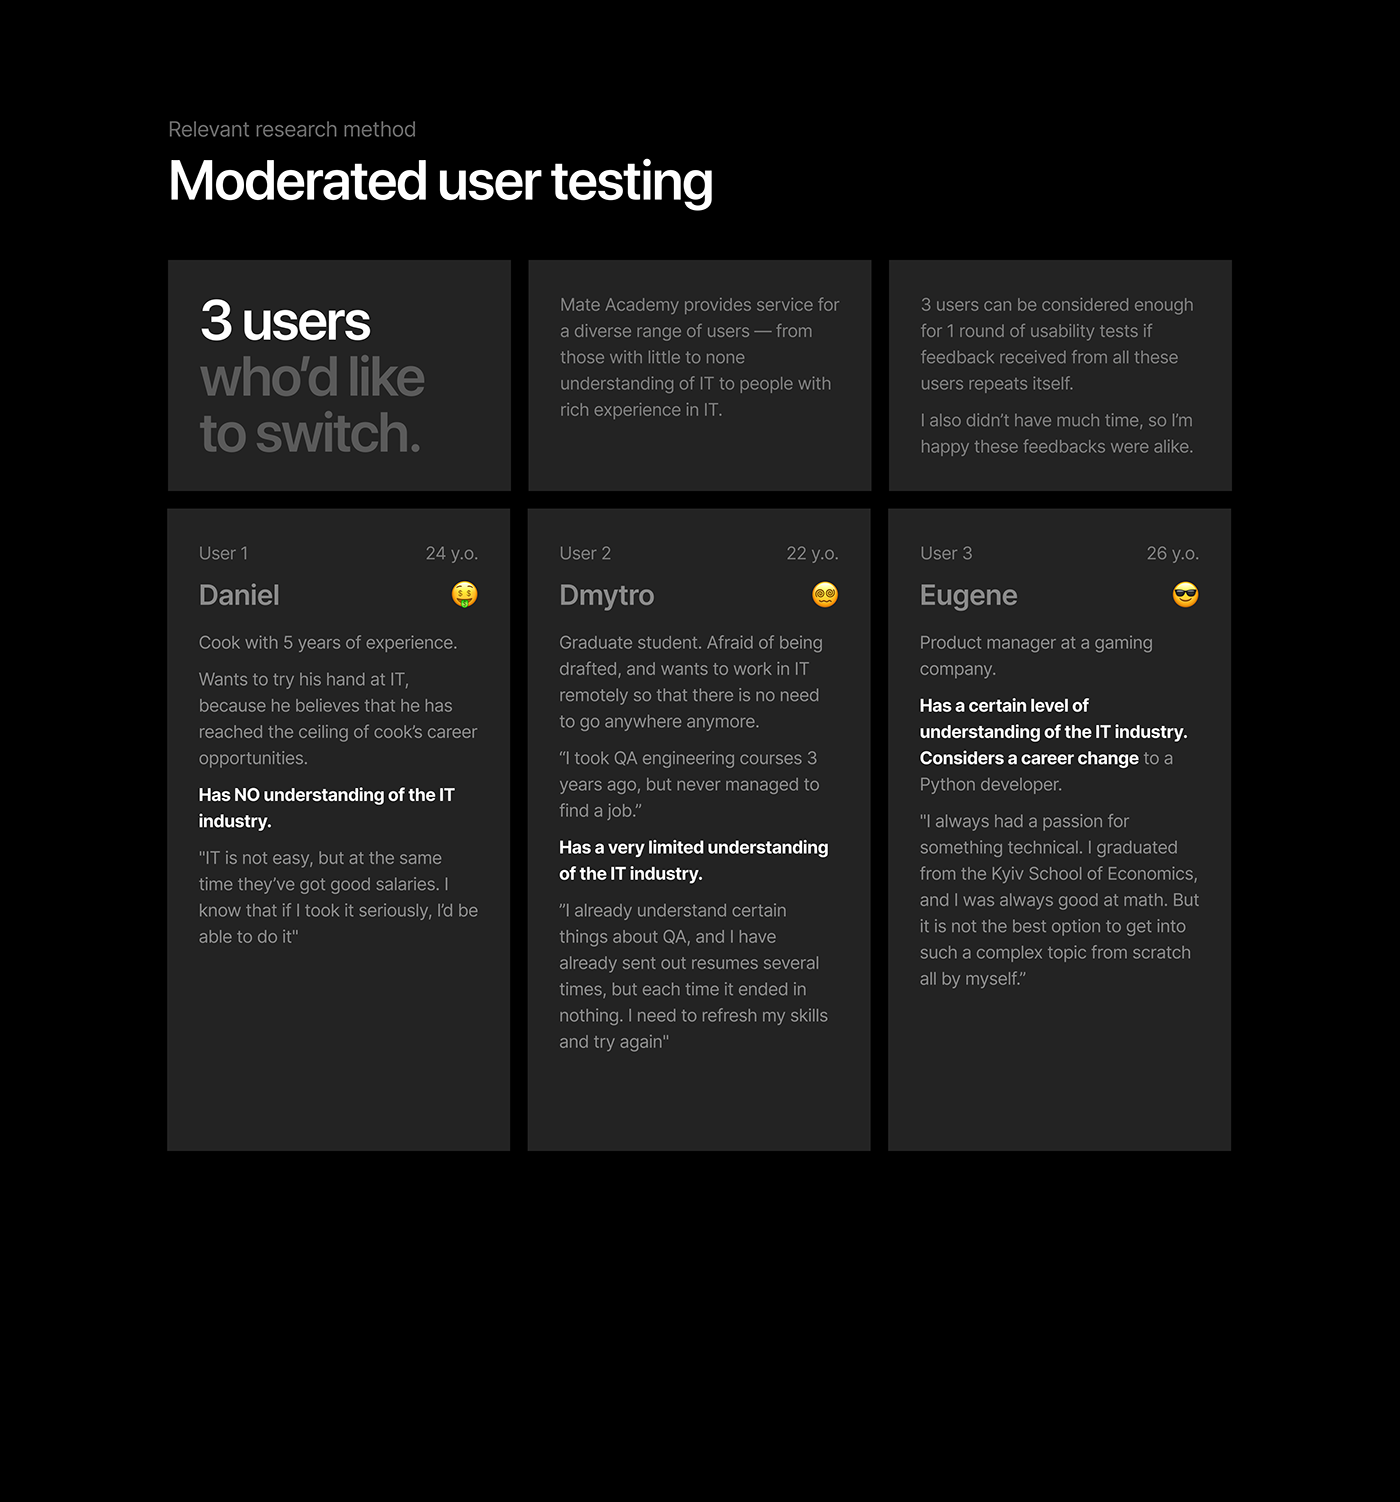 research user testing UX Research Website redesign UX writing UI/UX mobile website moderated user testing